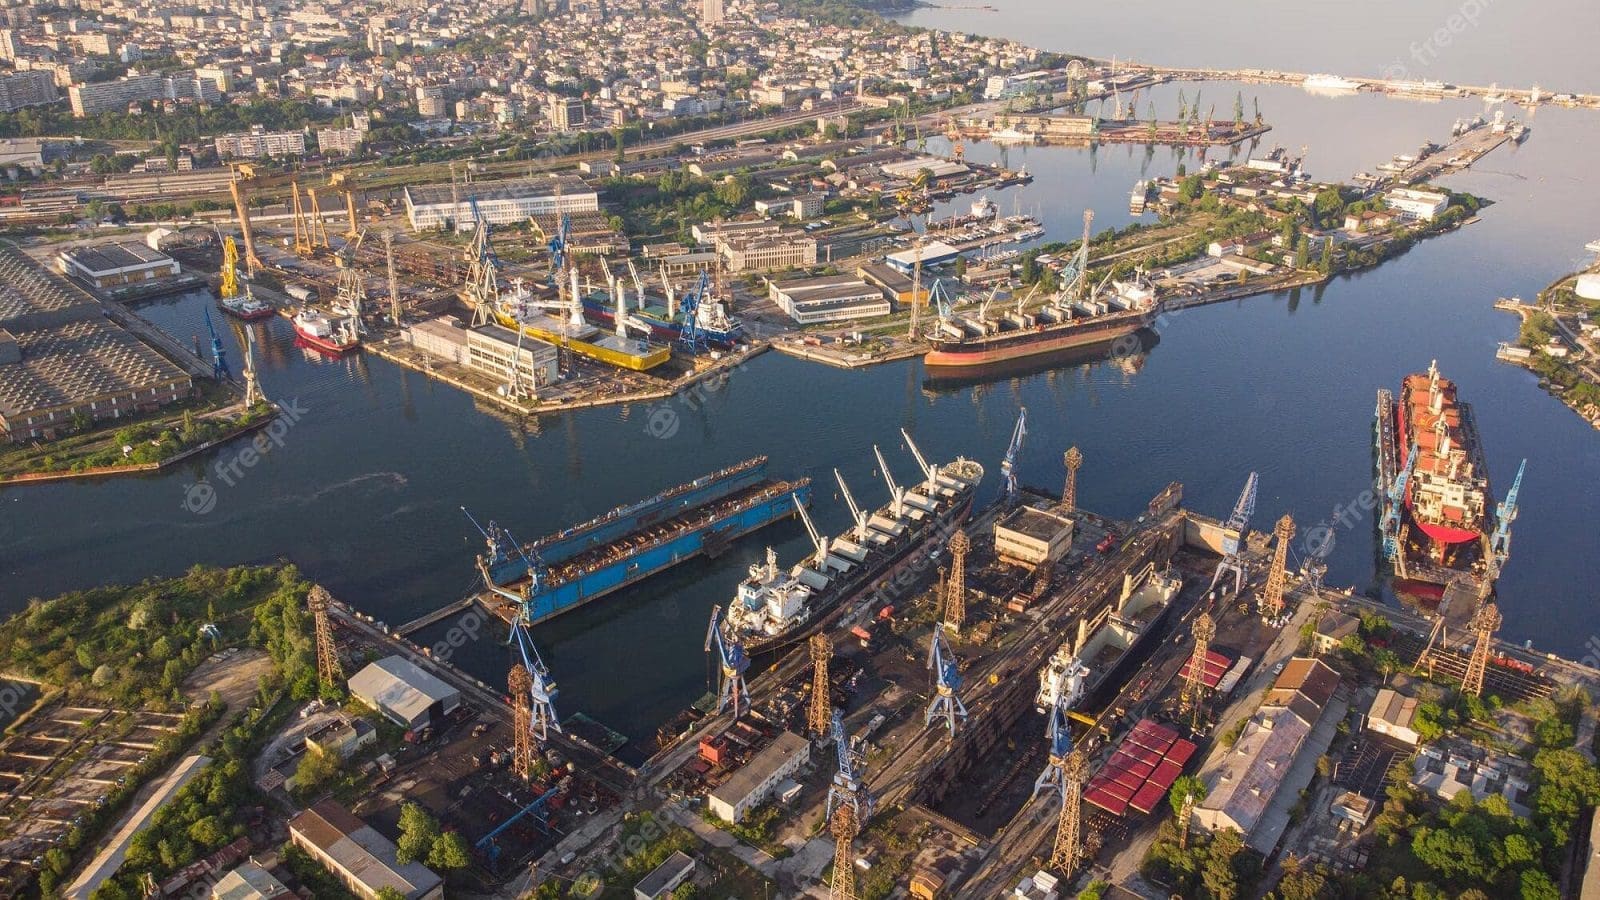 Russia faces grain shipping challenges as international traders reduce Russian activity